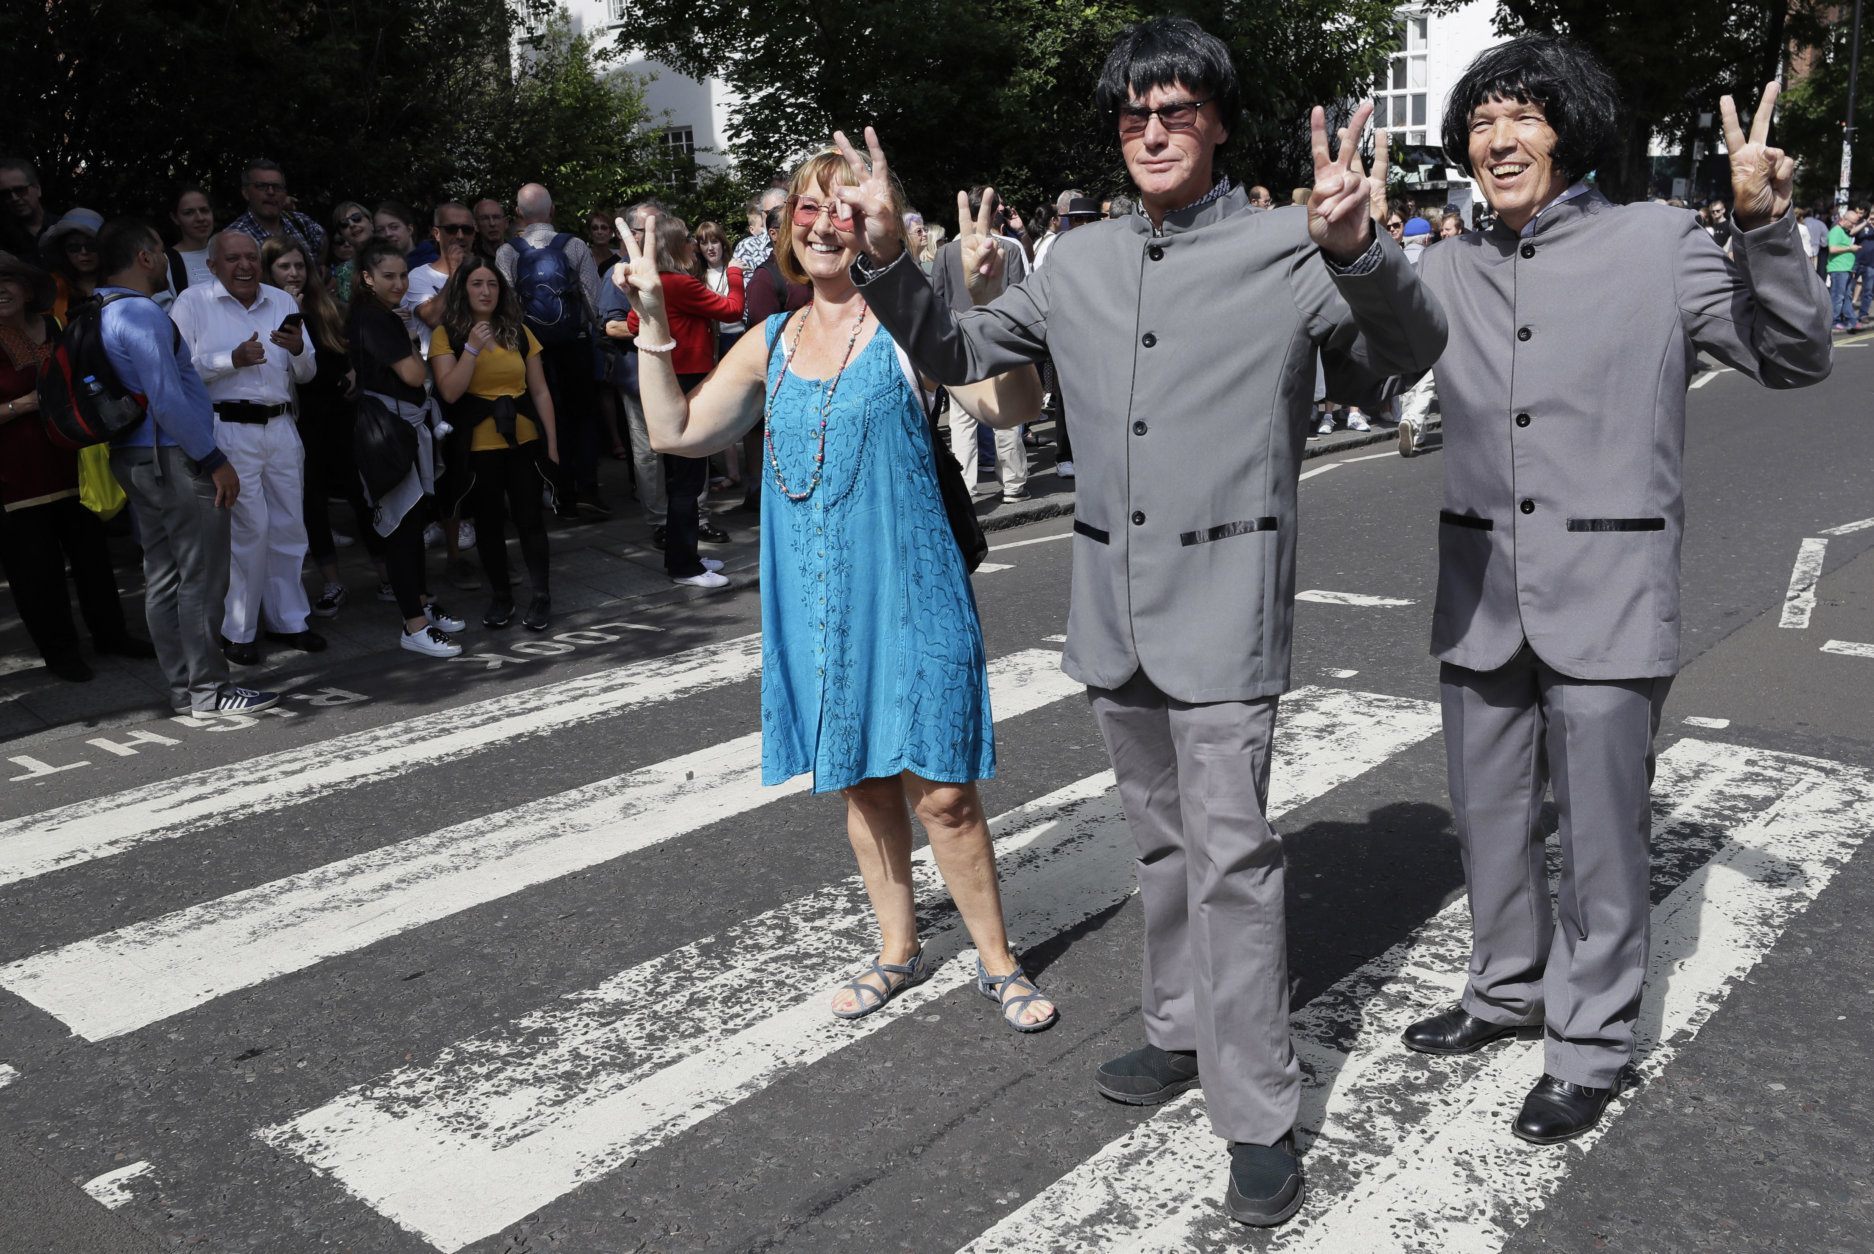 Fans pose for a photograph as yhousands of fans gather to walk across the Abbey Road zebra crossing, on the 50th anniversary of British pop musicians The Beatles doing it for the cover of their album 'Abbey Road' in St Johns Wood in London, Thursday, Aug. 8, 2019. They aimed to cross 50 years to the minute since the 'Fab Four' were photographed for the album. (AP Photo/Kirsty Wigglesworth)